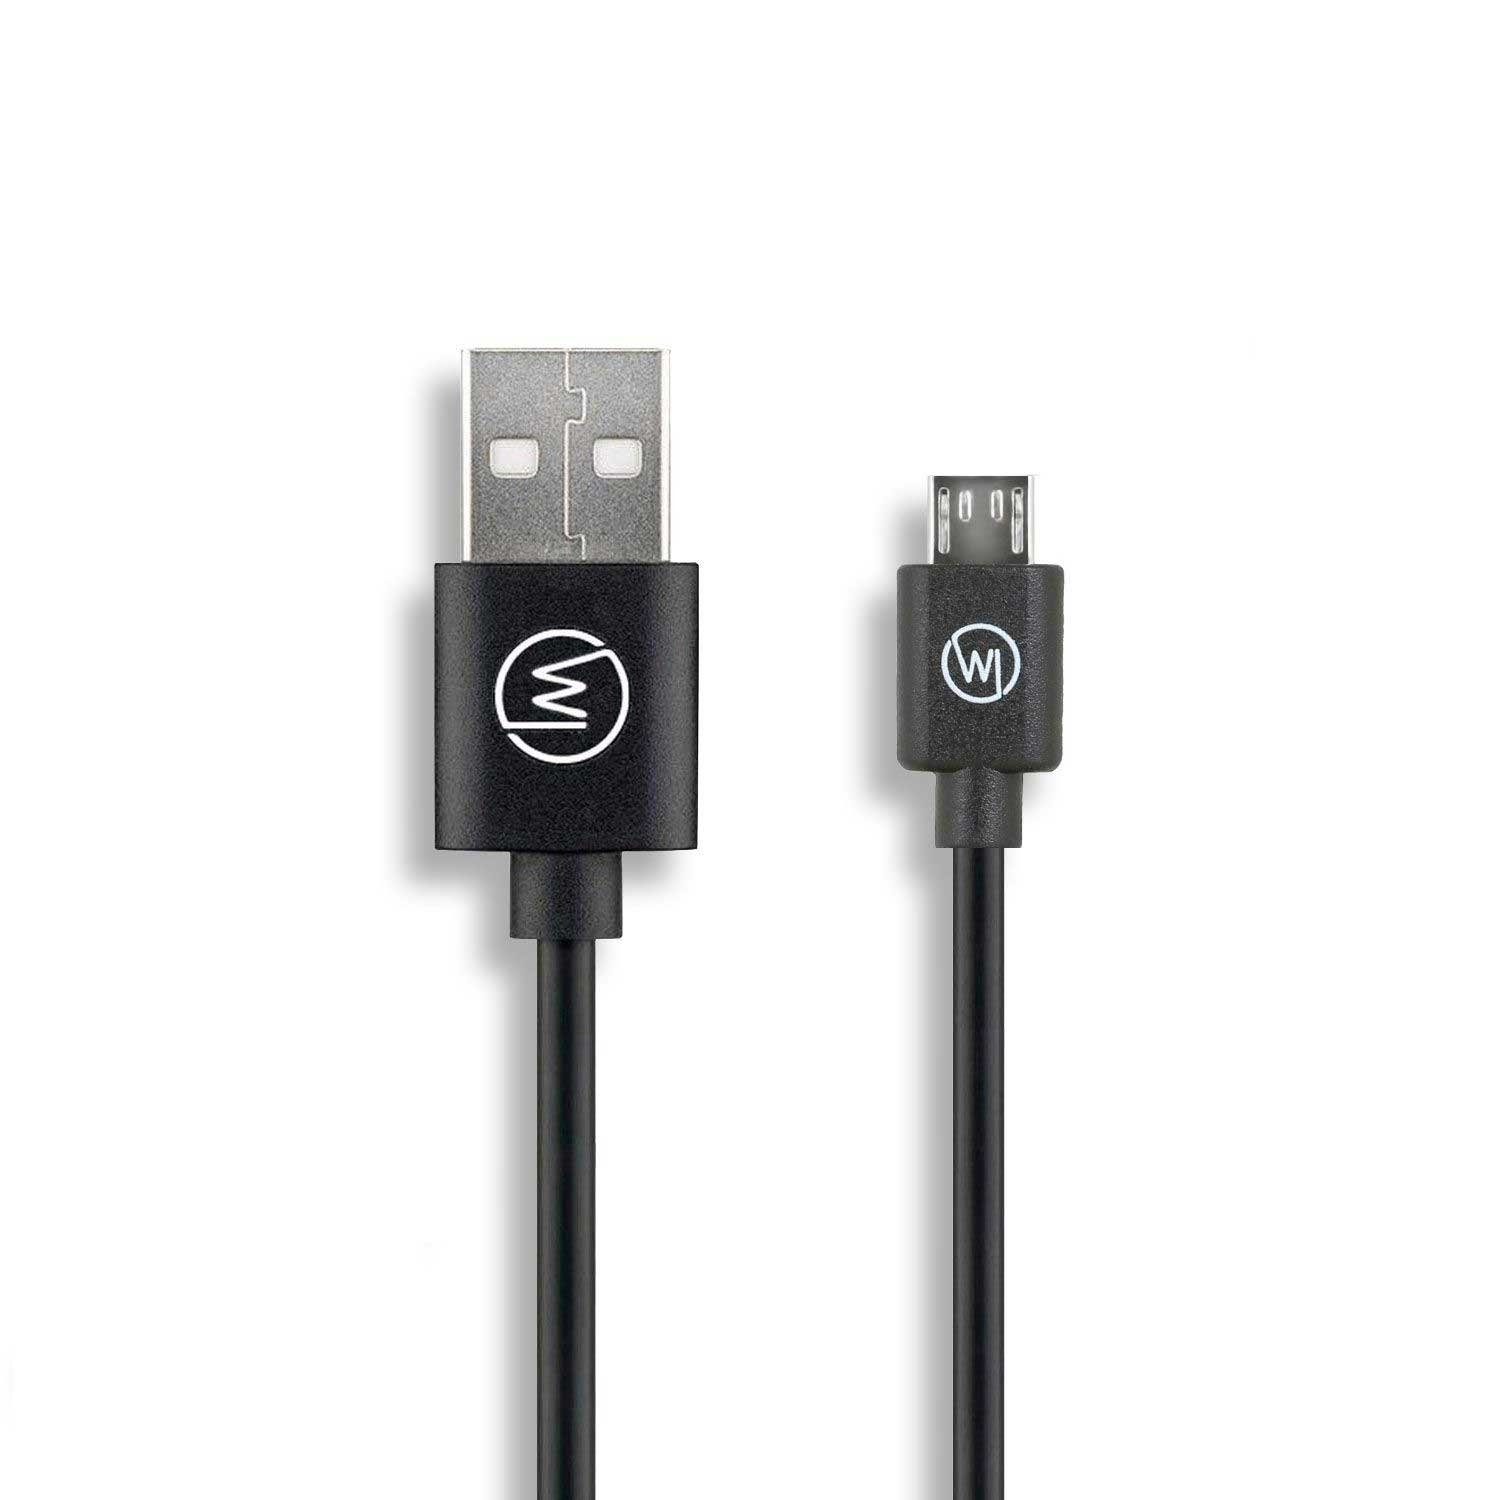 Wicked Chili MicroUSB Handy Ladekabel 3A Fast Charge USB Kabel Smartphone-Kabel, MicroUSB, USB-A (100 cm), Mit Klettband zum einfachen Wiederaufrollen, 2.5A Fast Charge, Hi-Spee